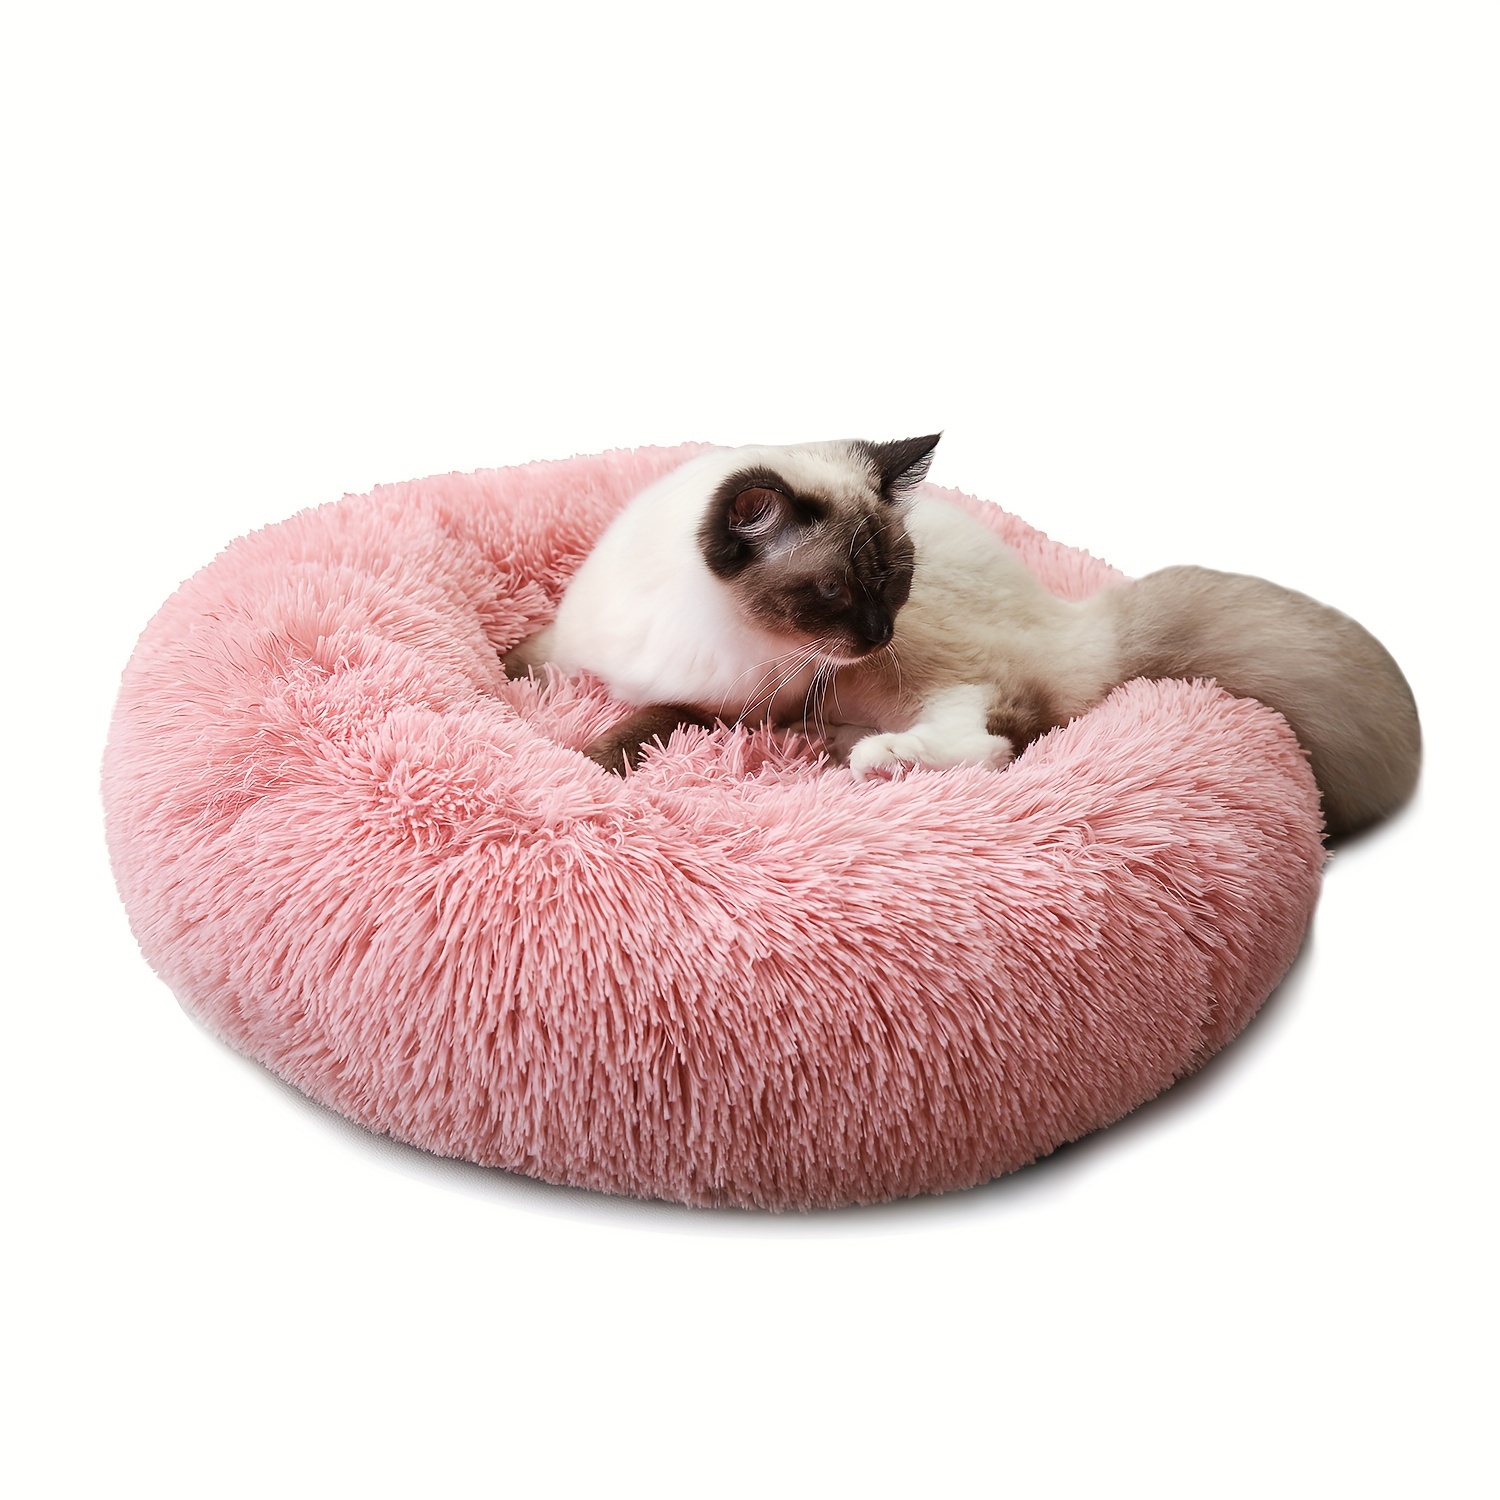 

Round Dog Cat Bed Donut Cuddler, Faux Fur Plush Pet Cushion For Large Medium Small Dogs, Self-warming And Cozy For Improved Sleep Pink